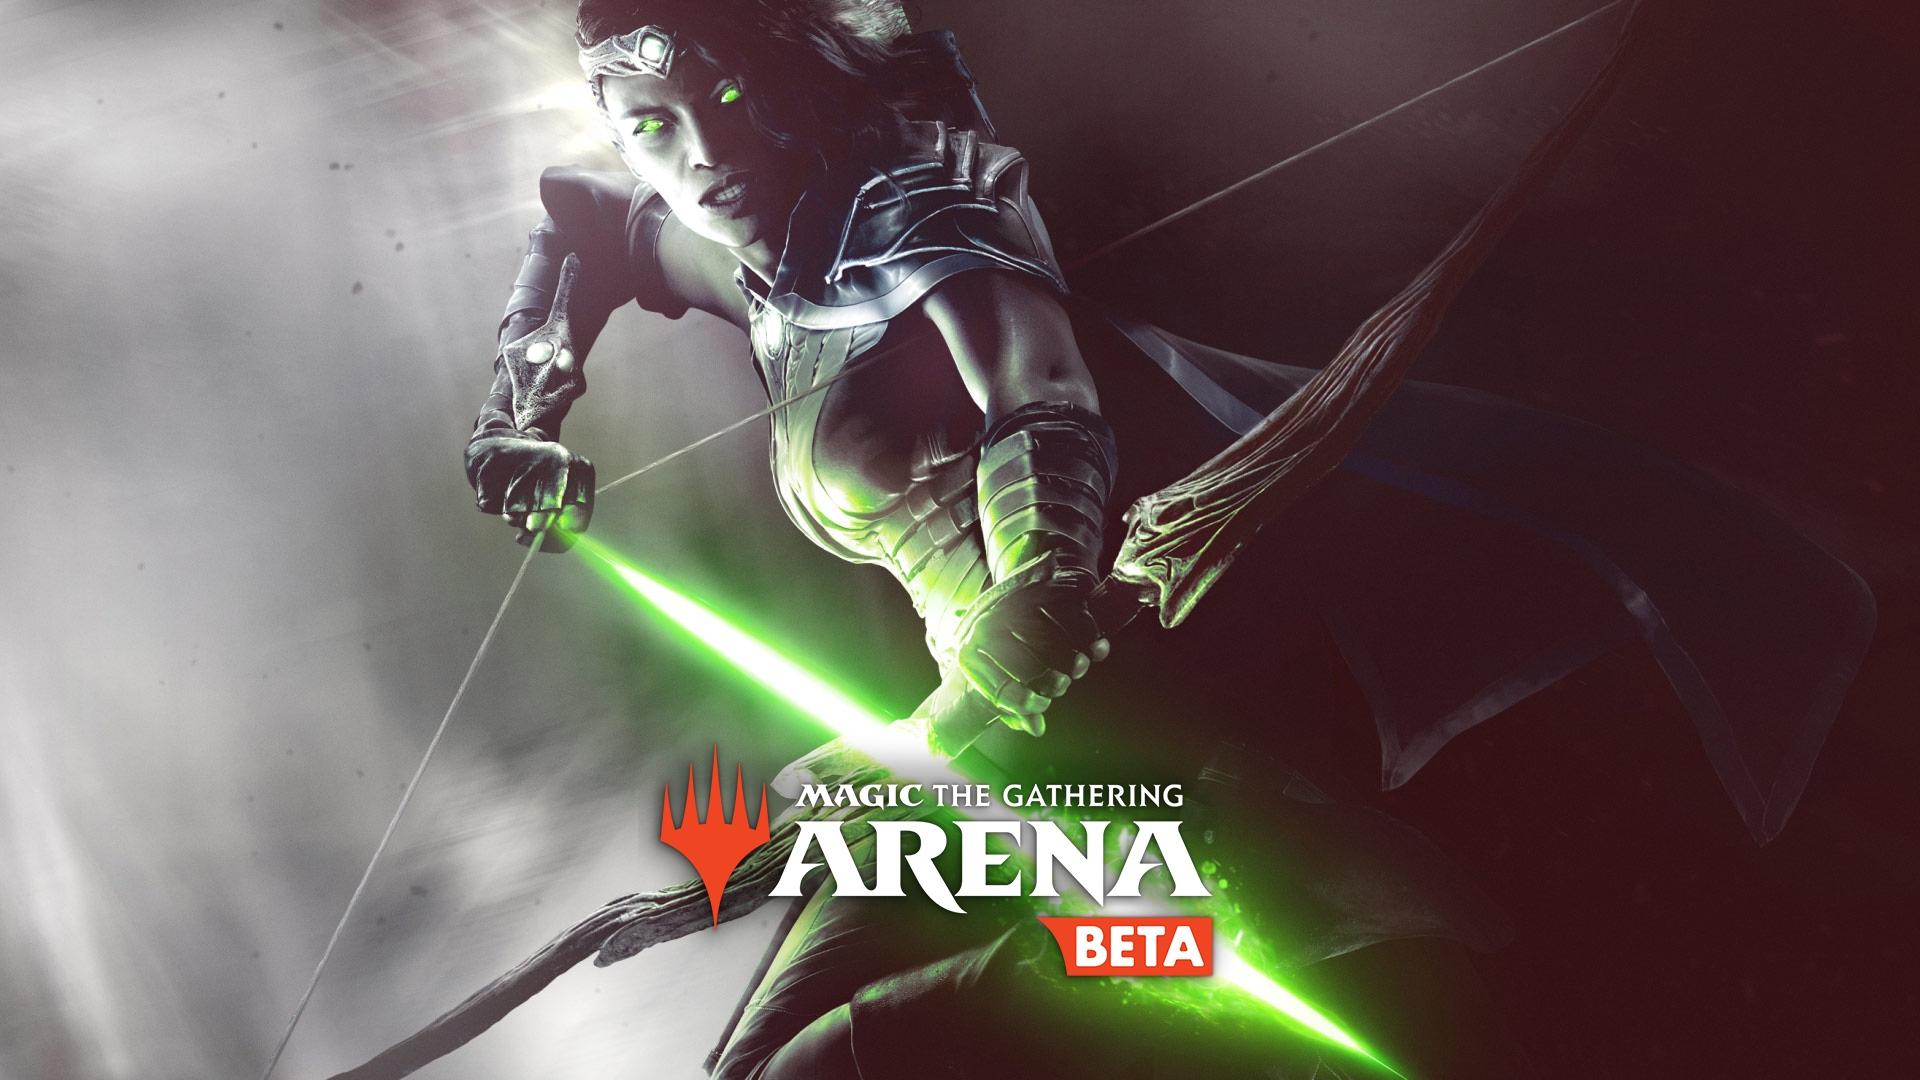 You can now challenge your friends in Magic: The Gathering Arena